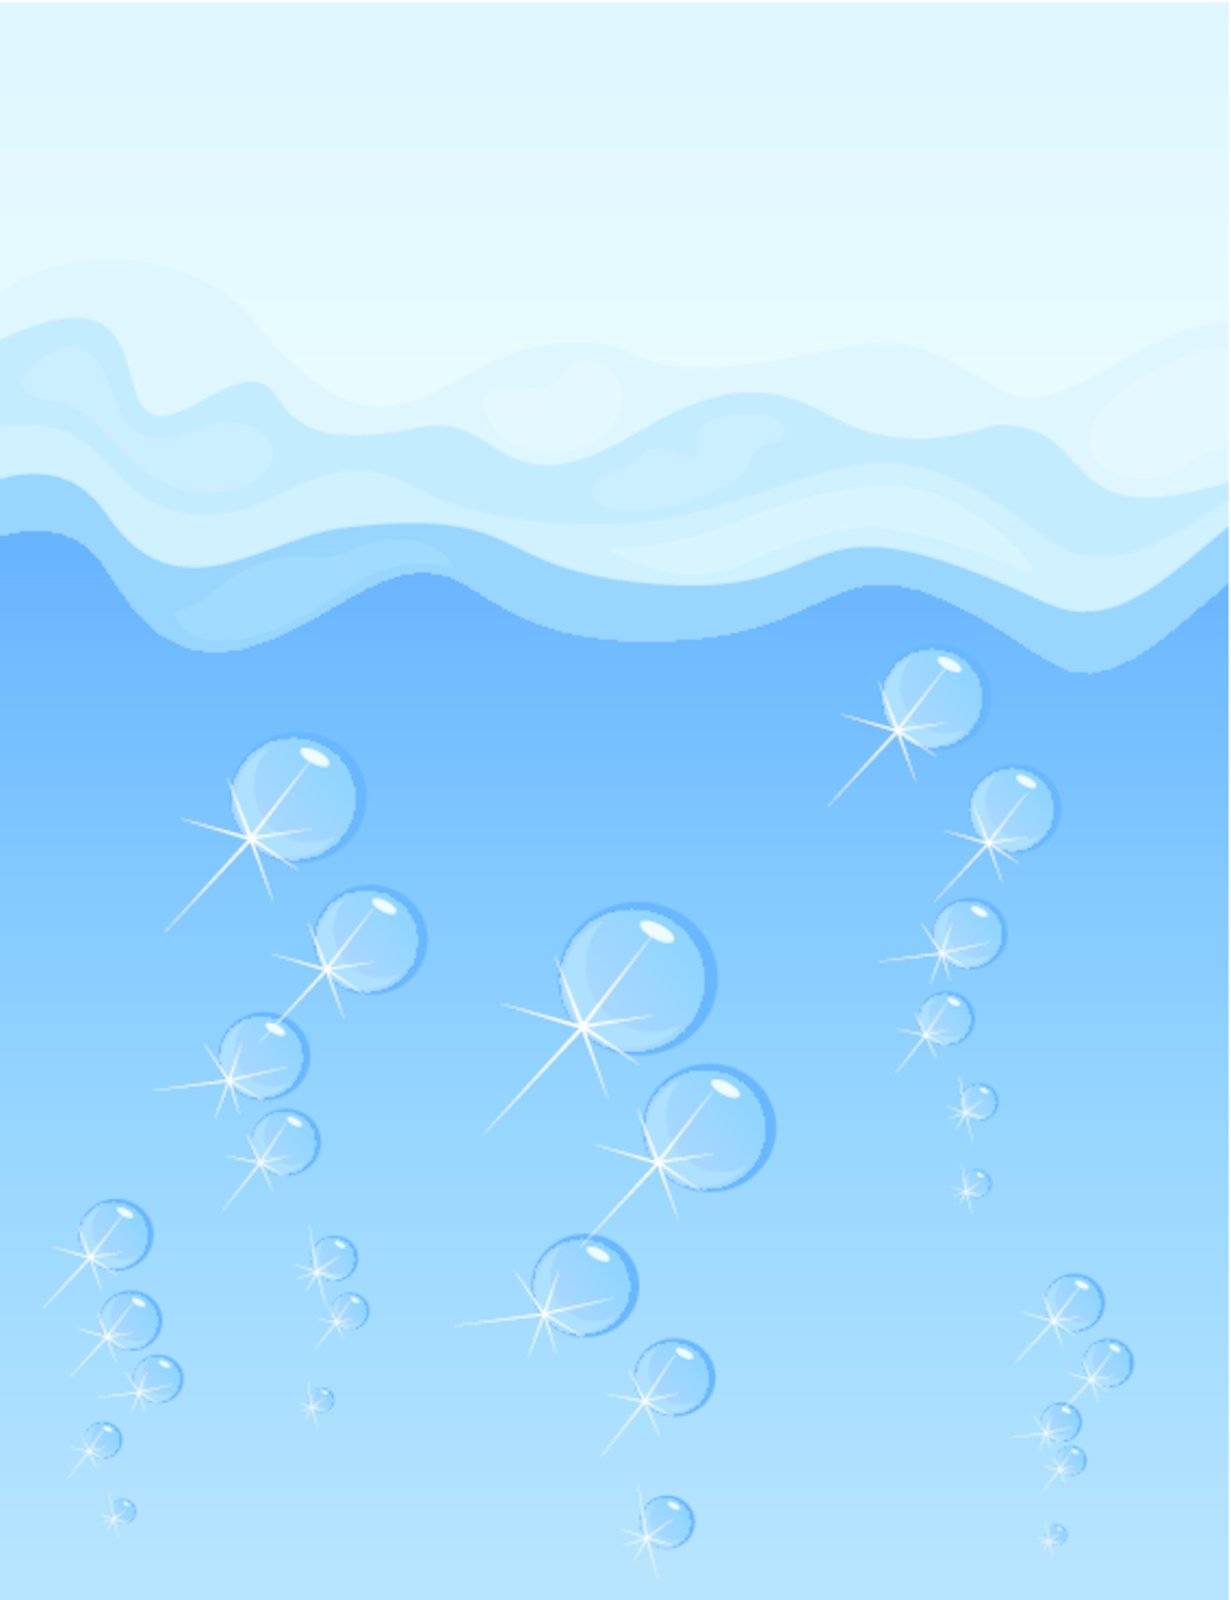 From depth of the sea air rises. A vector illustration